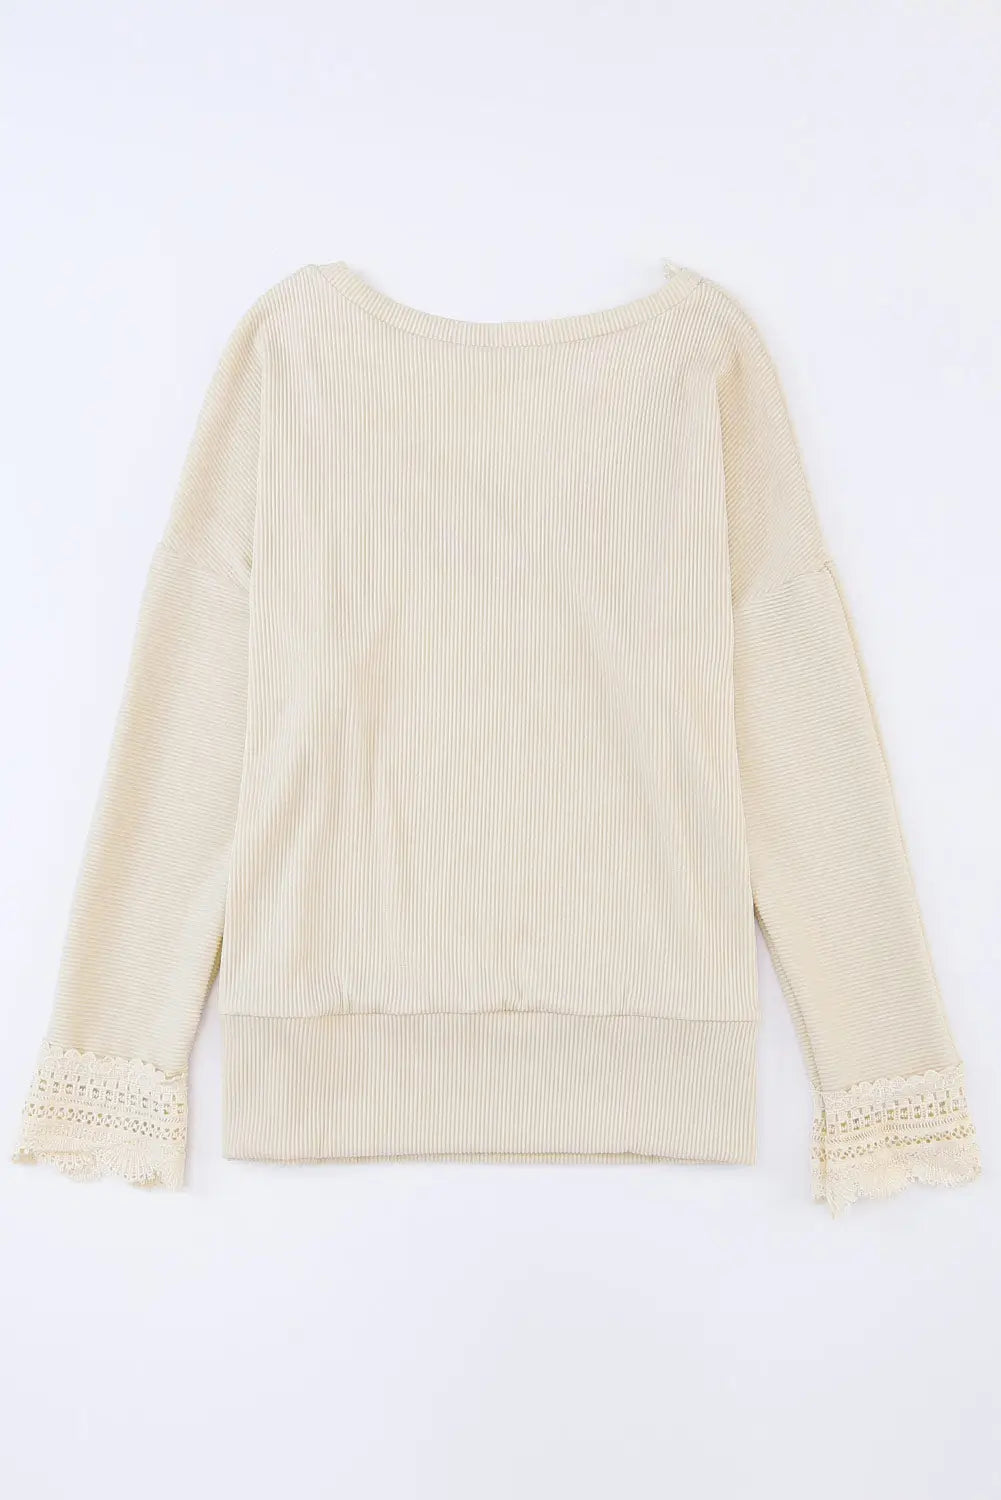 Apricot ribbed texture lace trim v neck long sleeve top - tops